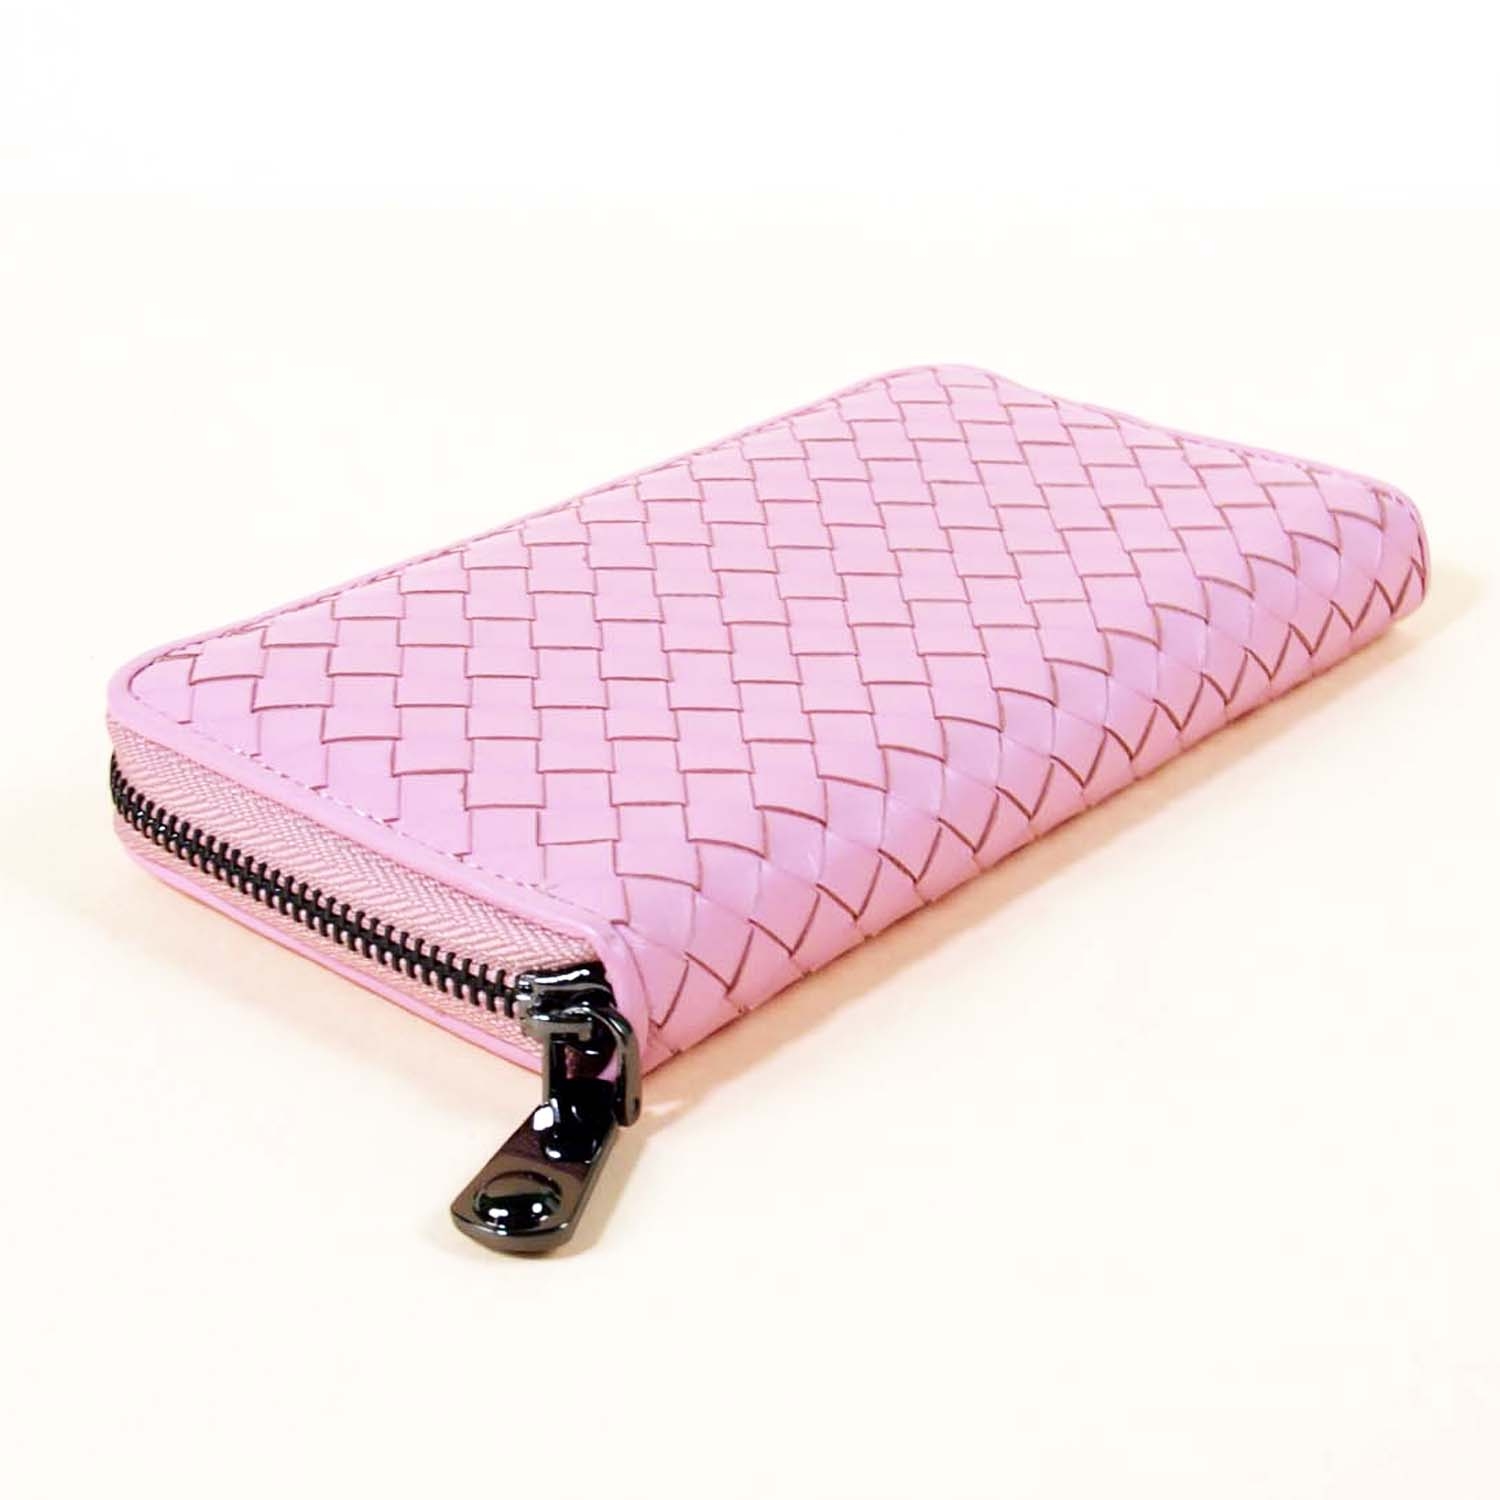 Modern Heritage Natty Woven Lamb Leather Wallet Angled View